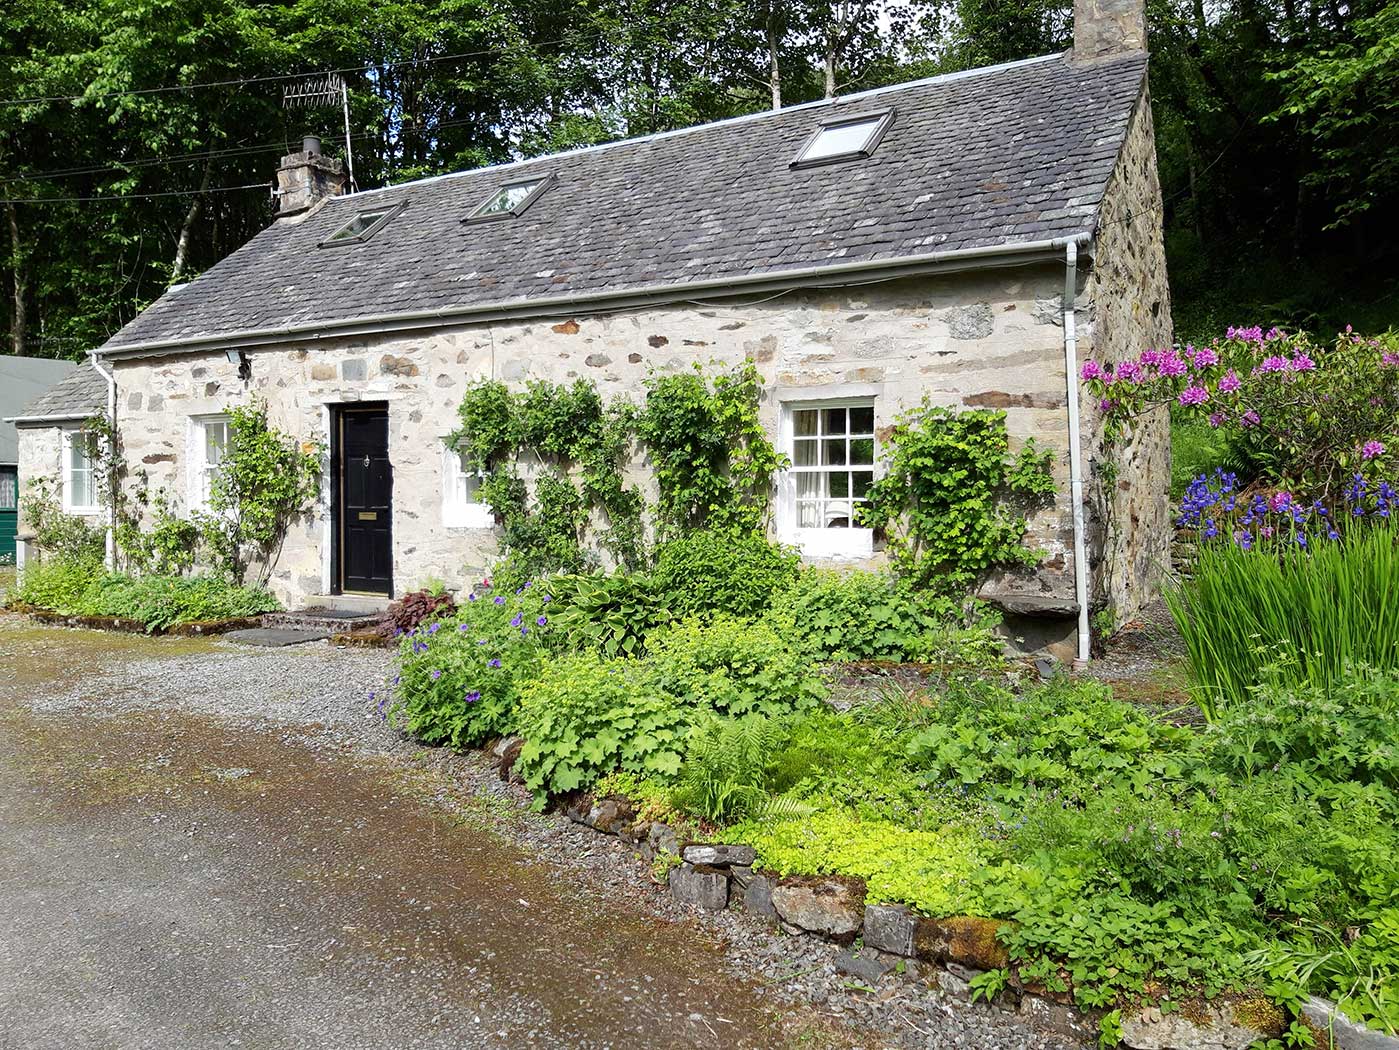 Pictures of Atholl Cottage in the heart of Perthshire